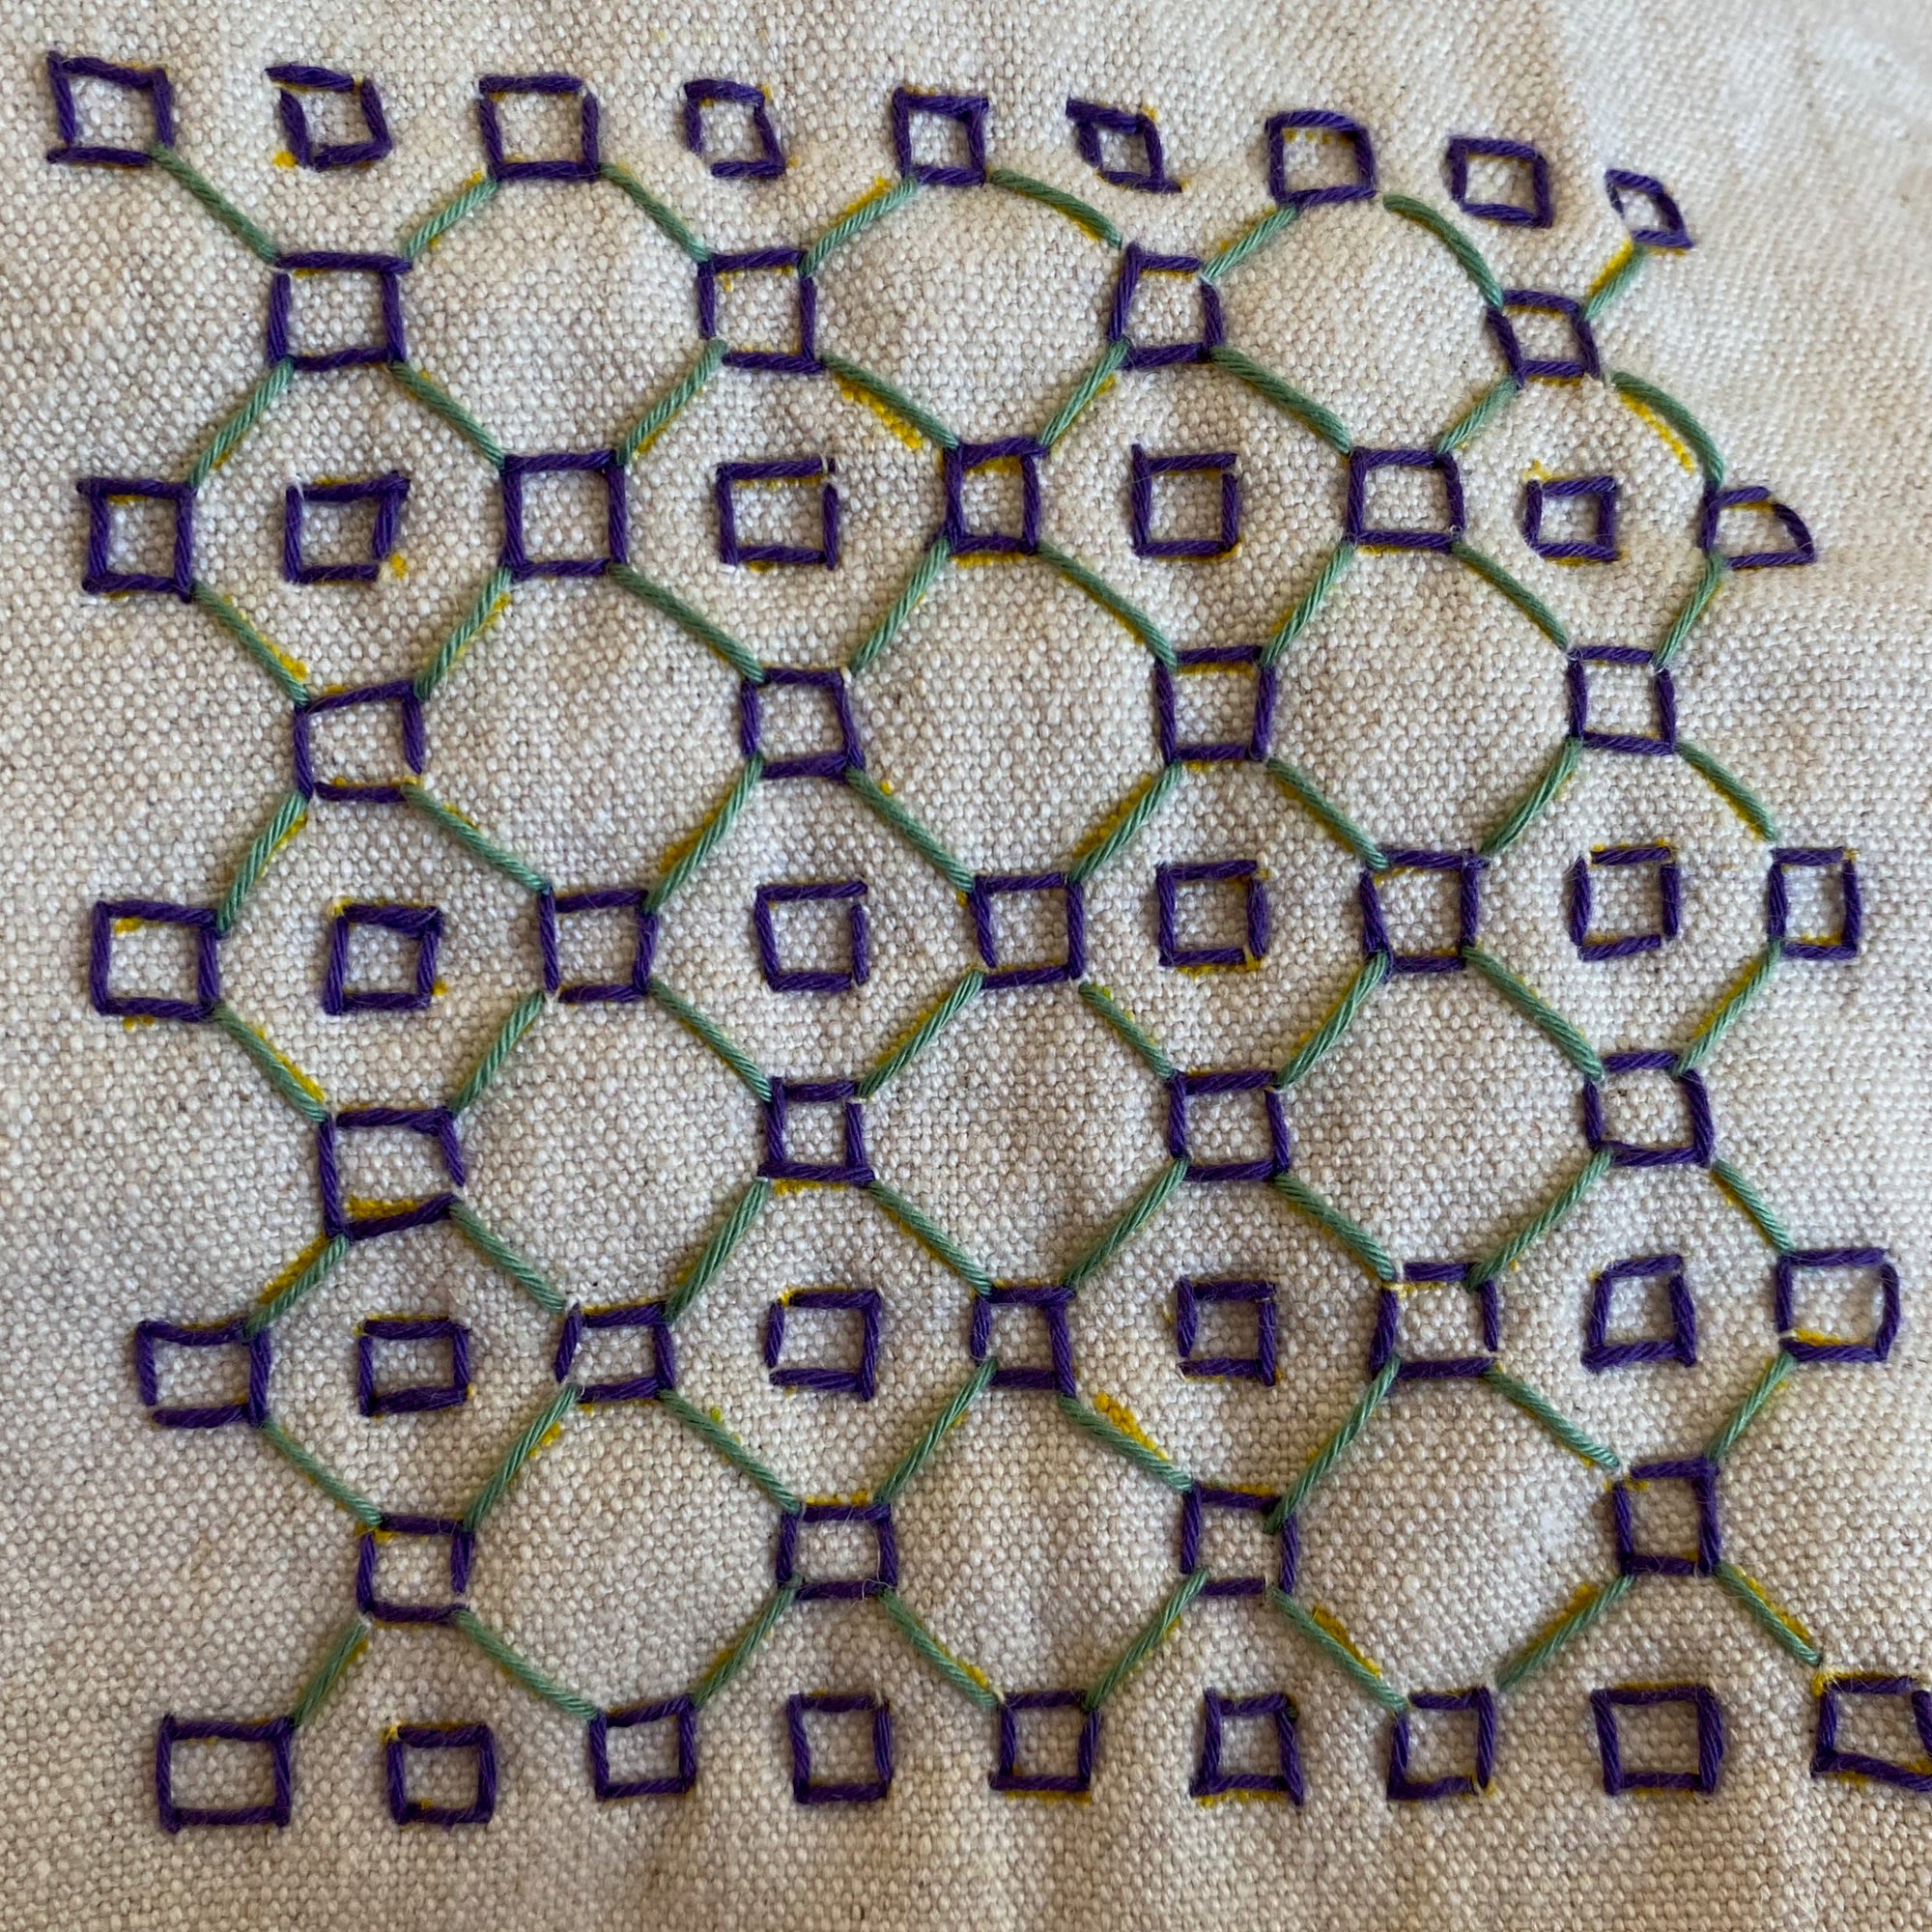 the finished stitched stencil pattern